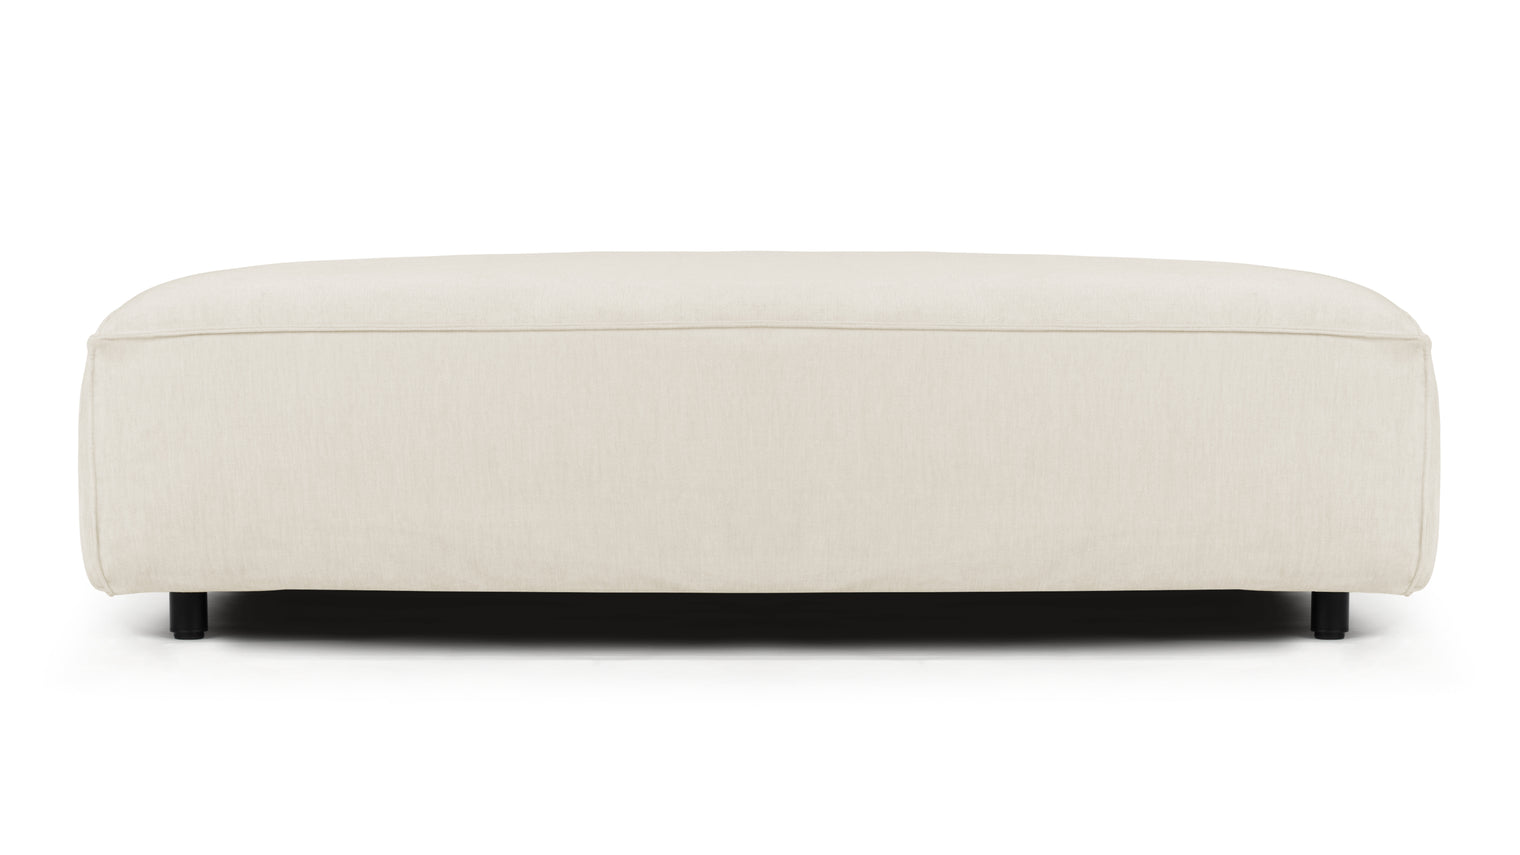 Unparalleled Comfort | Sink into a world of pure comfort as you lounge on the Extrasoft Sofa. Its plush, oversized cushions are filled with the highest quality materials, providing an irresistibly soft and supportive seating experience. Whether you're watching a movie, reading a book, or simply unwinding after a long day, this sofa offers an oasis of relaxation.
